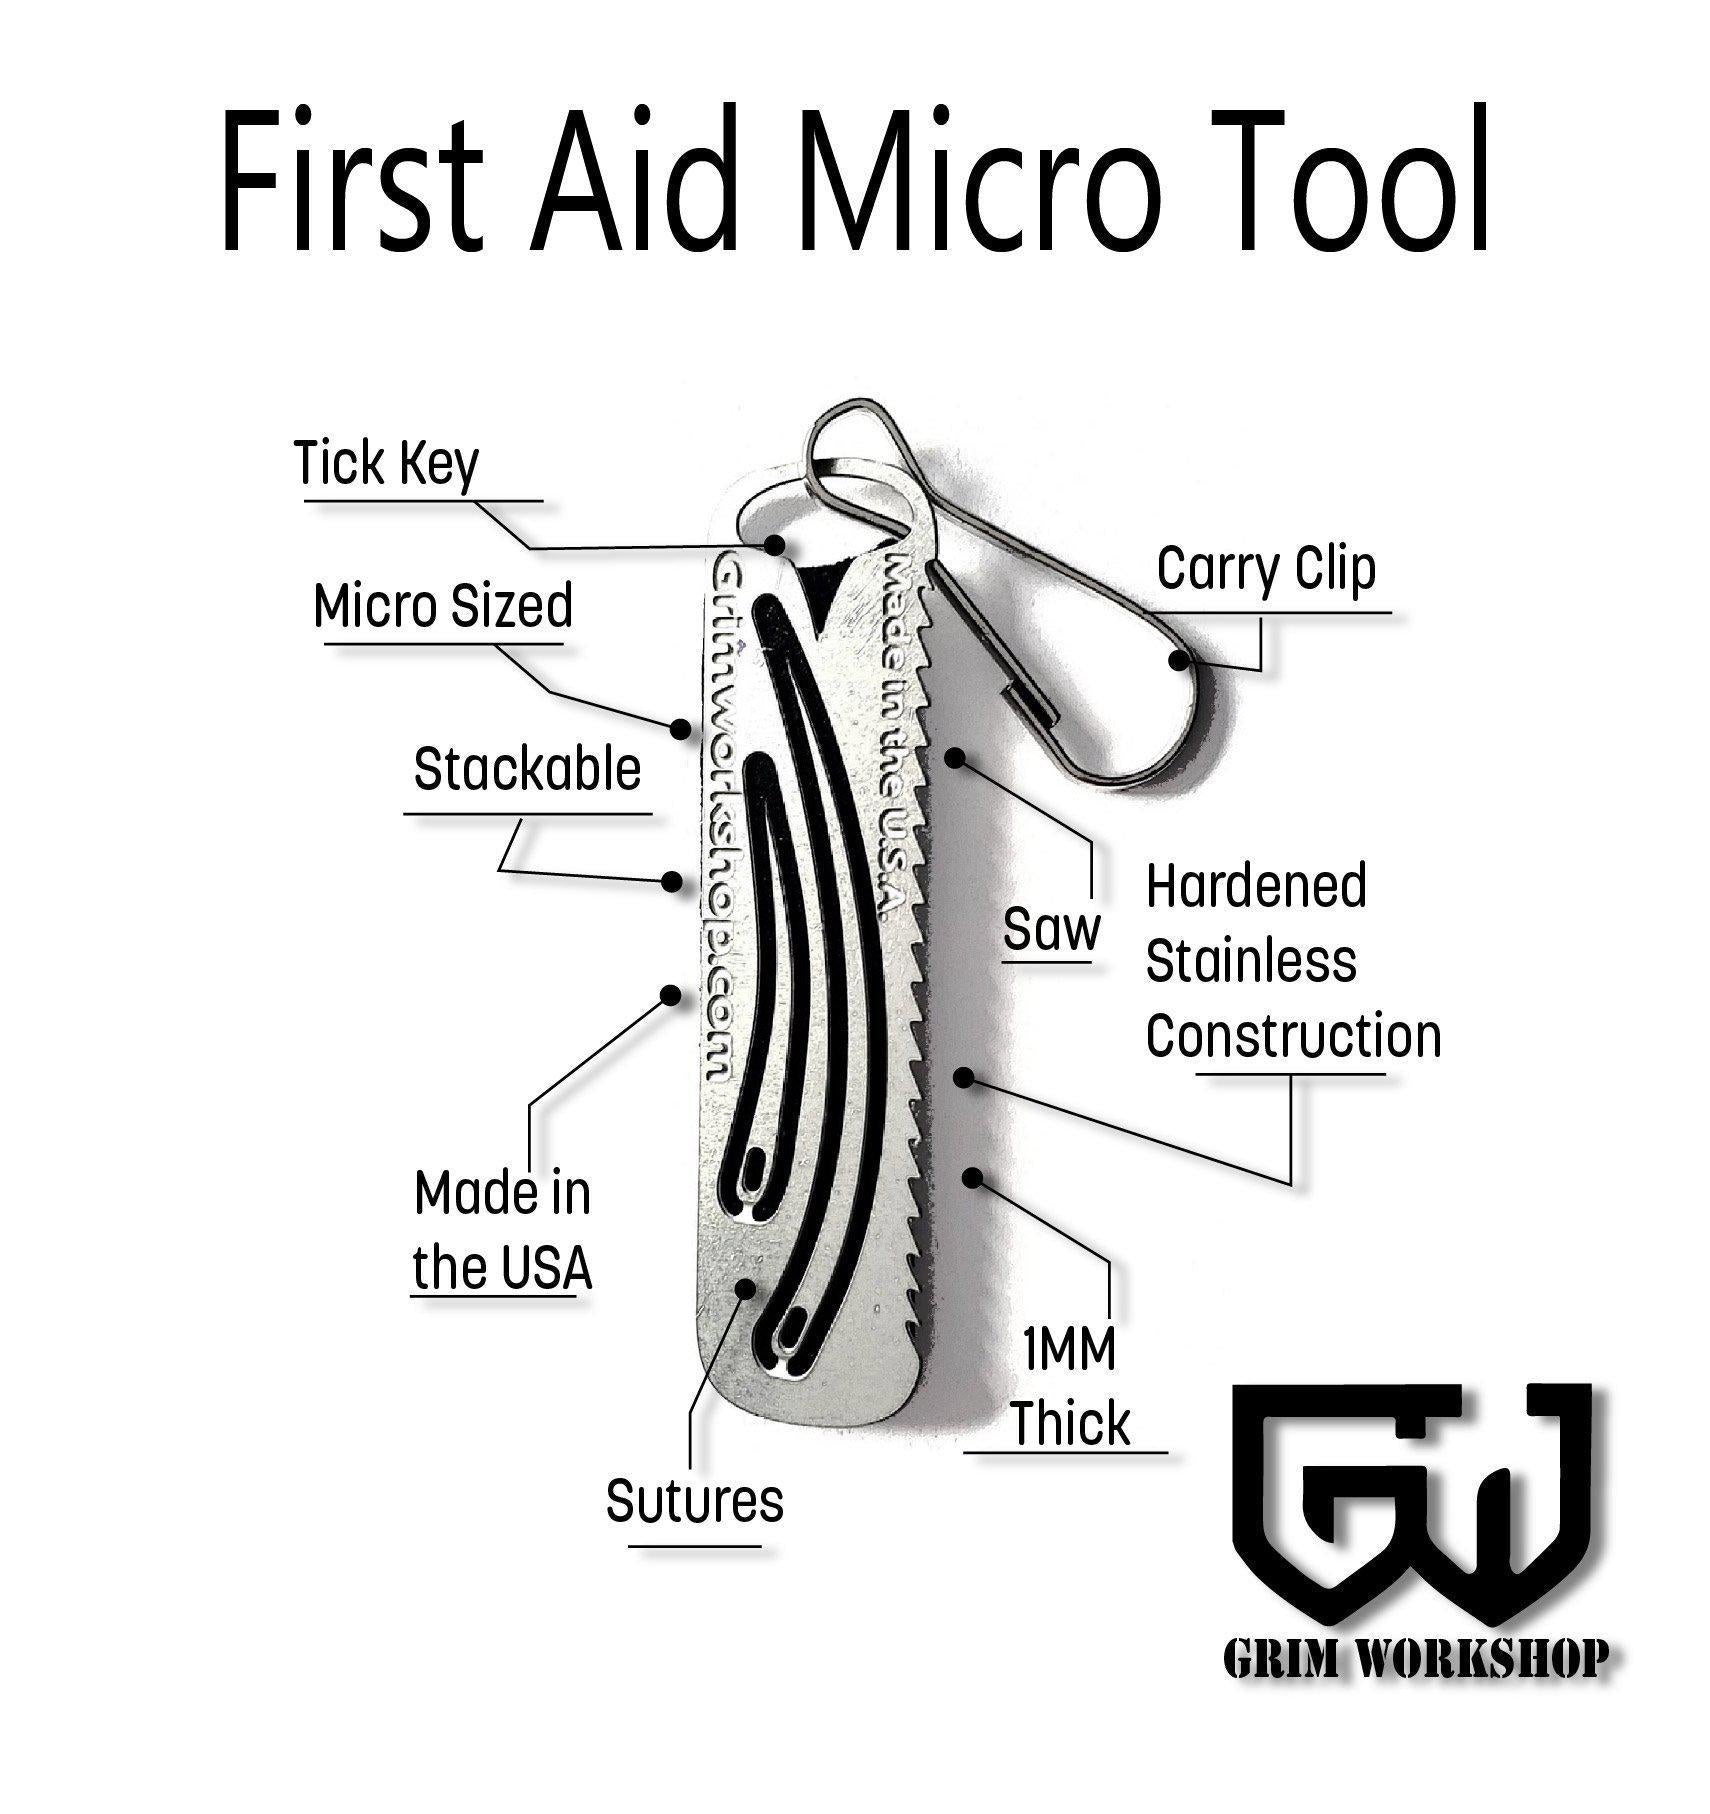 First Aid Micro Tool-Grimworkshop-bugoutbag-bushcraft-edc-gear-edctool-everydaycarry-survivalcard-survivalkit-wilderness-prepping-toolkit